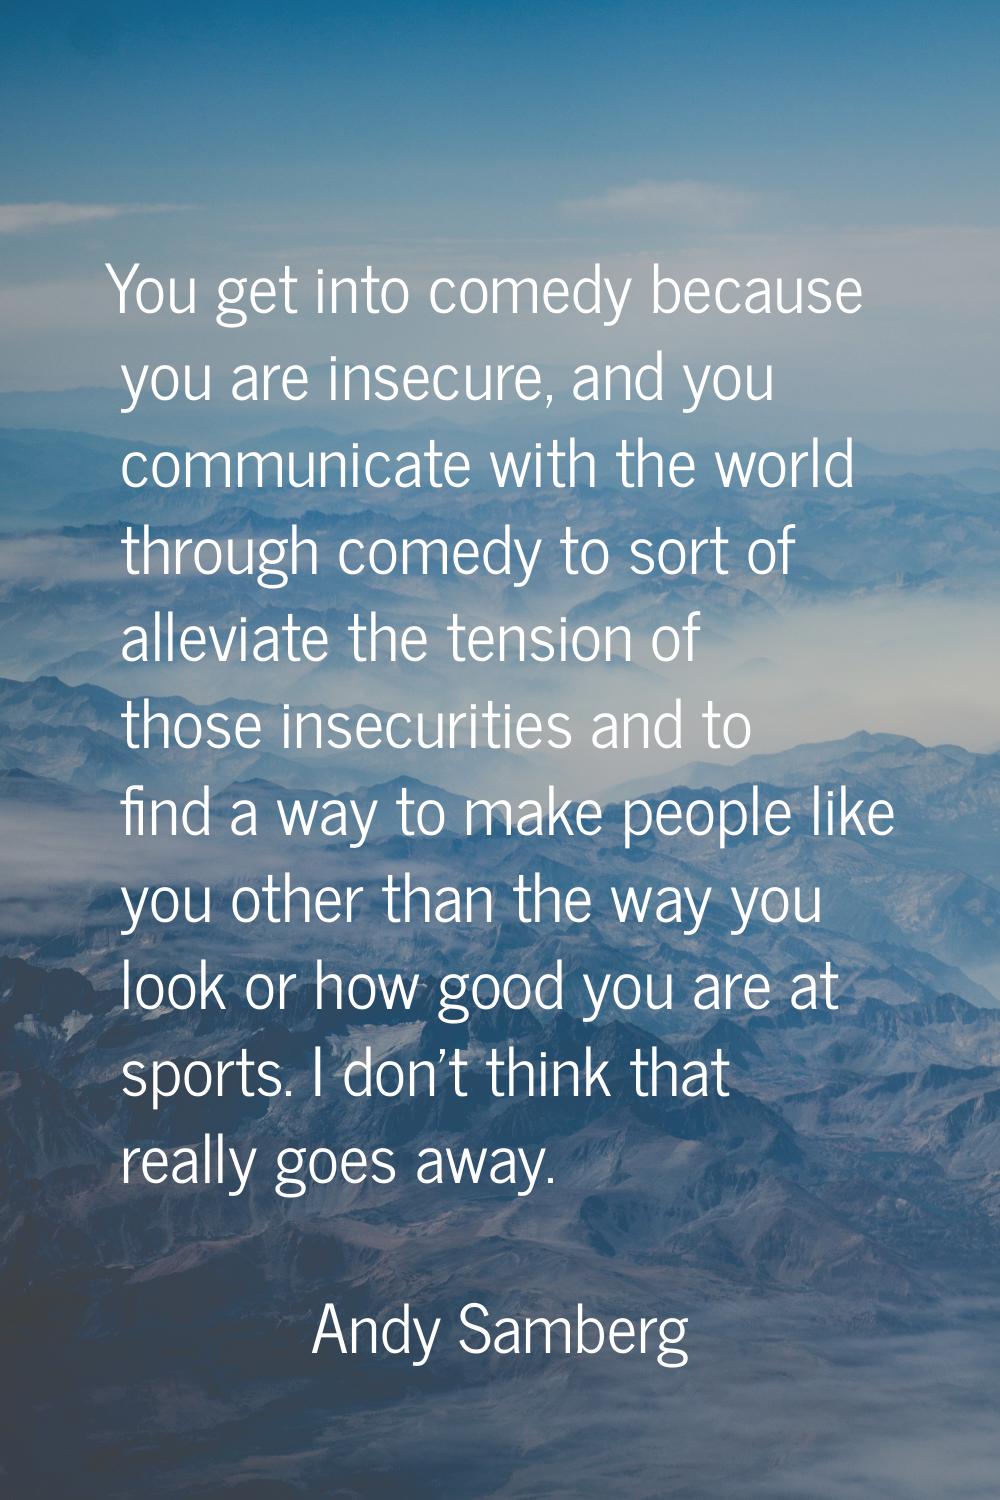 You get into comedy because you are insecure, and you communicate with the world through comedy to 